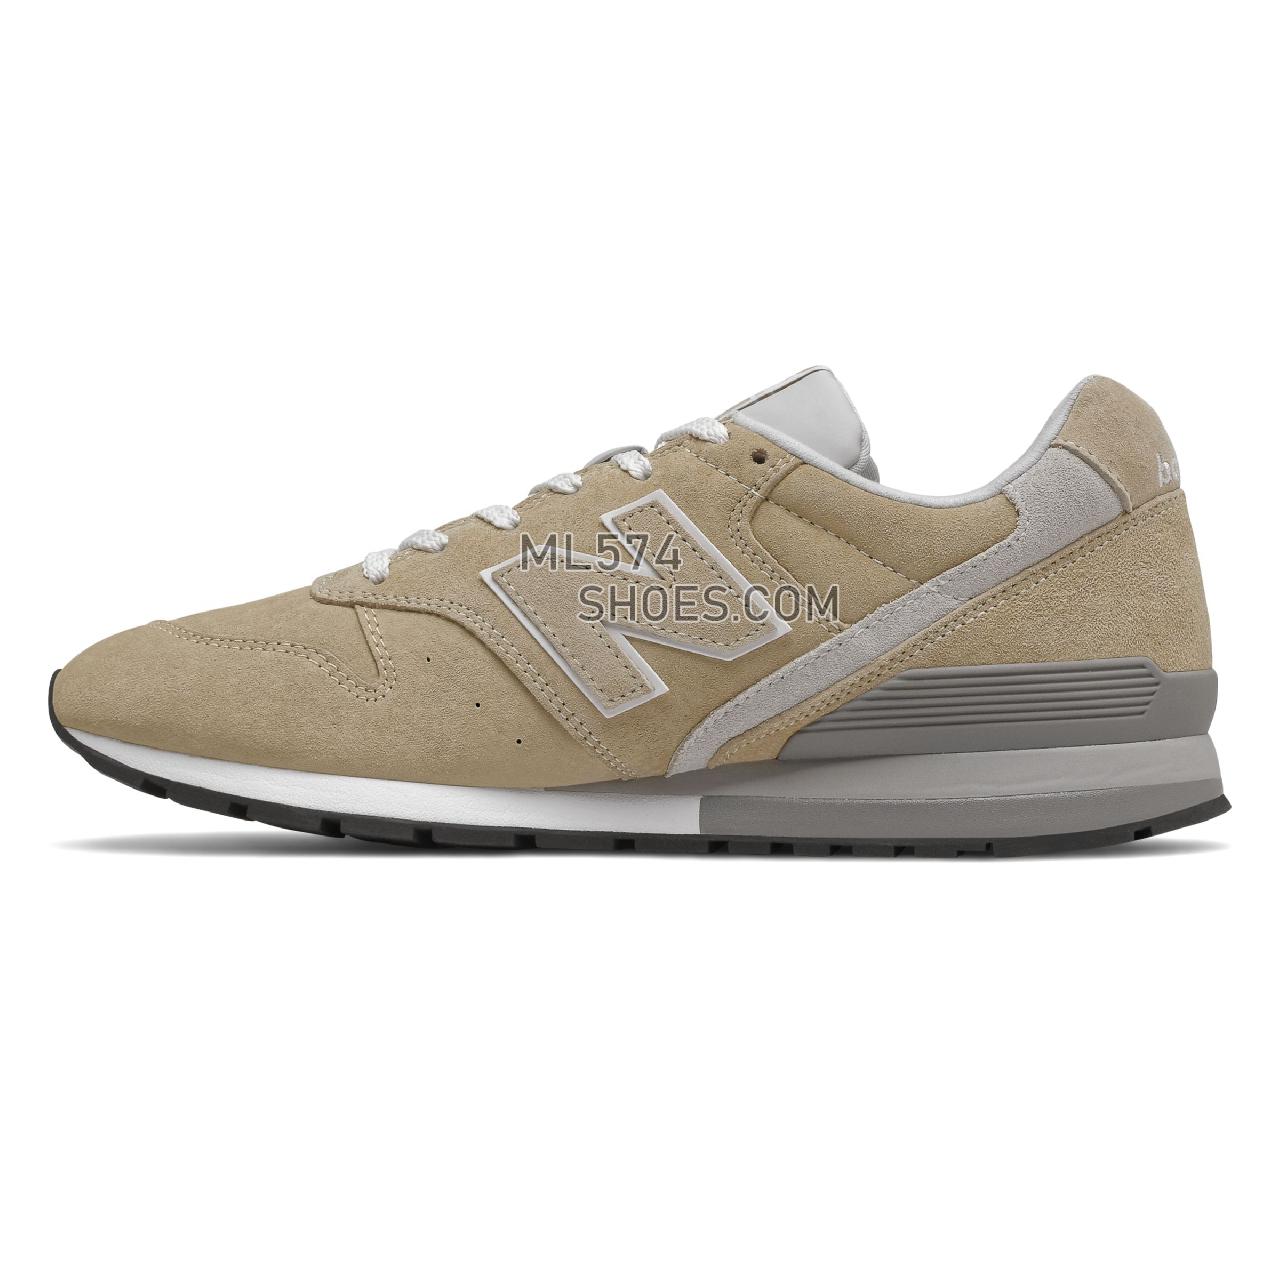 New Balance 996v2 - Men's Classic Sneakers - Incense with Rain Cloud - CM996WE2